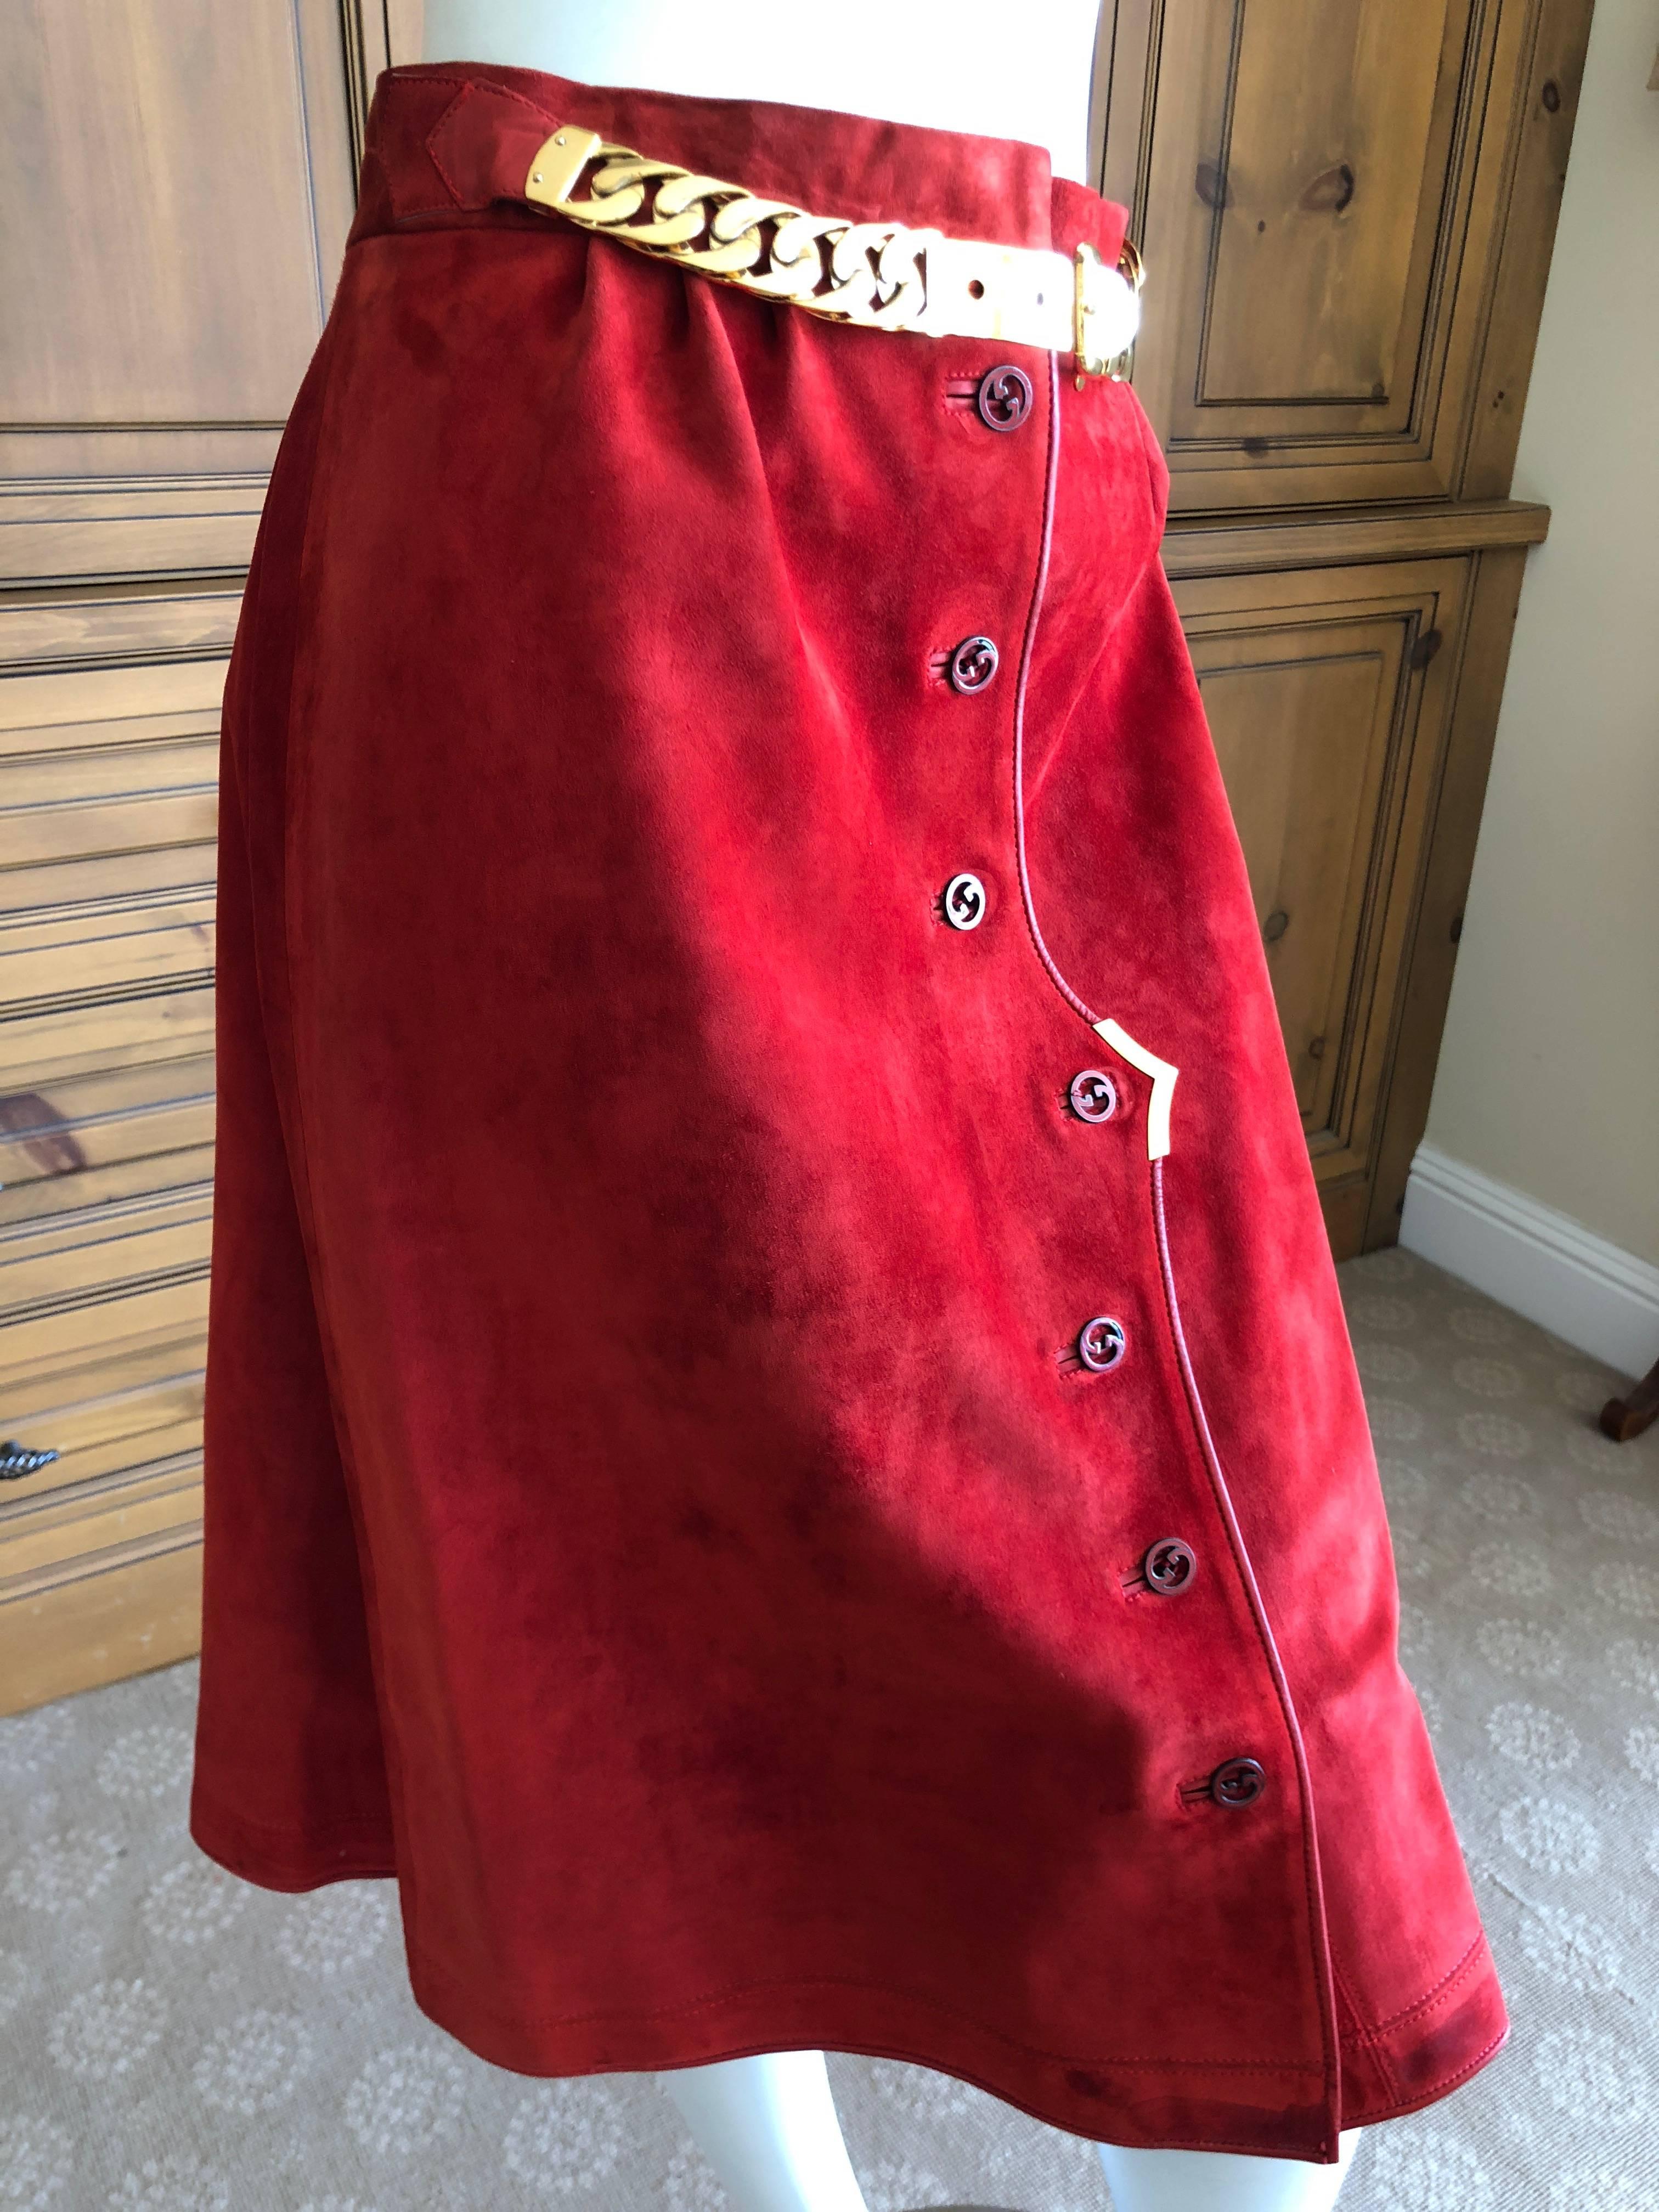 Women's  Gucci 1970's Red Leather Trim Suede Skirt with Chain Details and Big GG Buttons For Sale